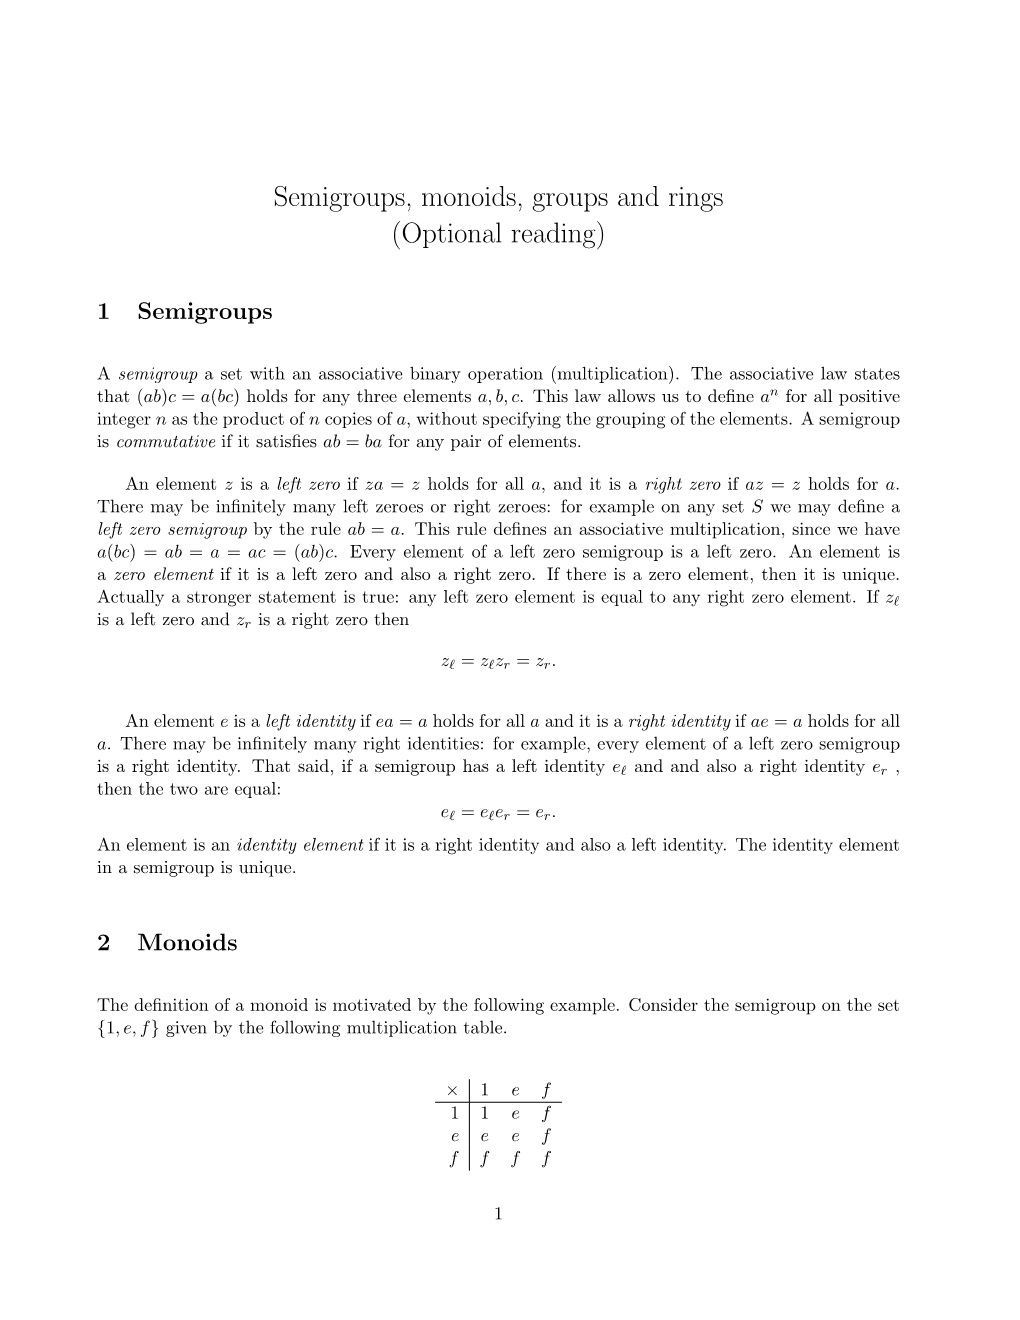 Semigroups, Monoids, Groups and Rings (Optional Reading)